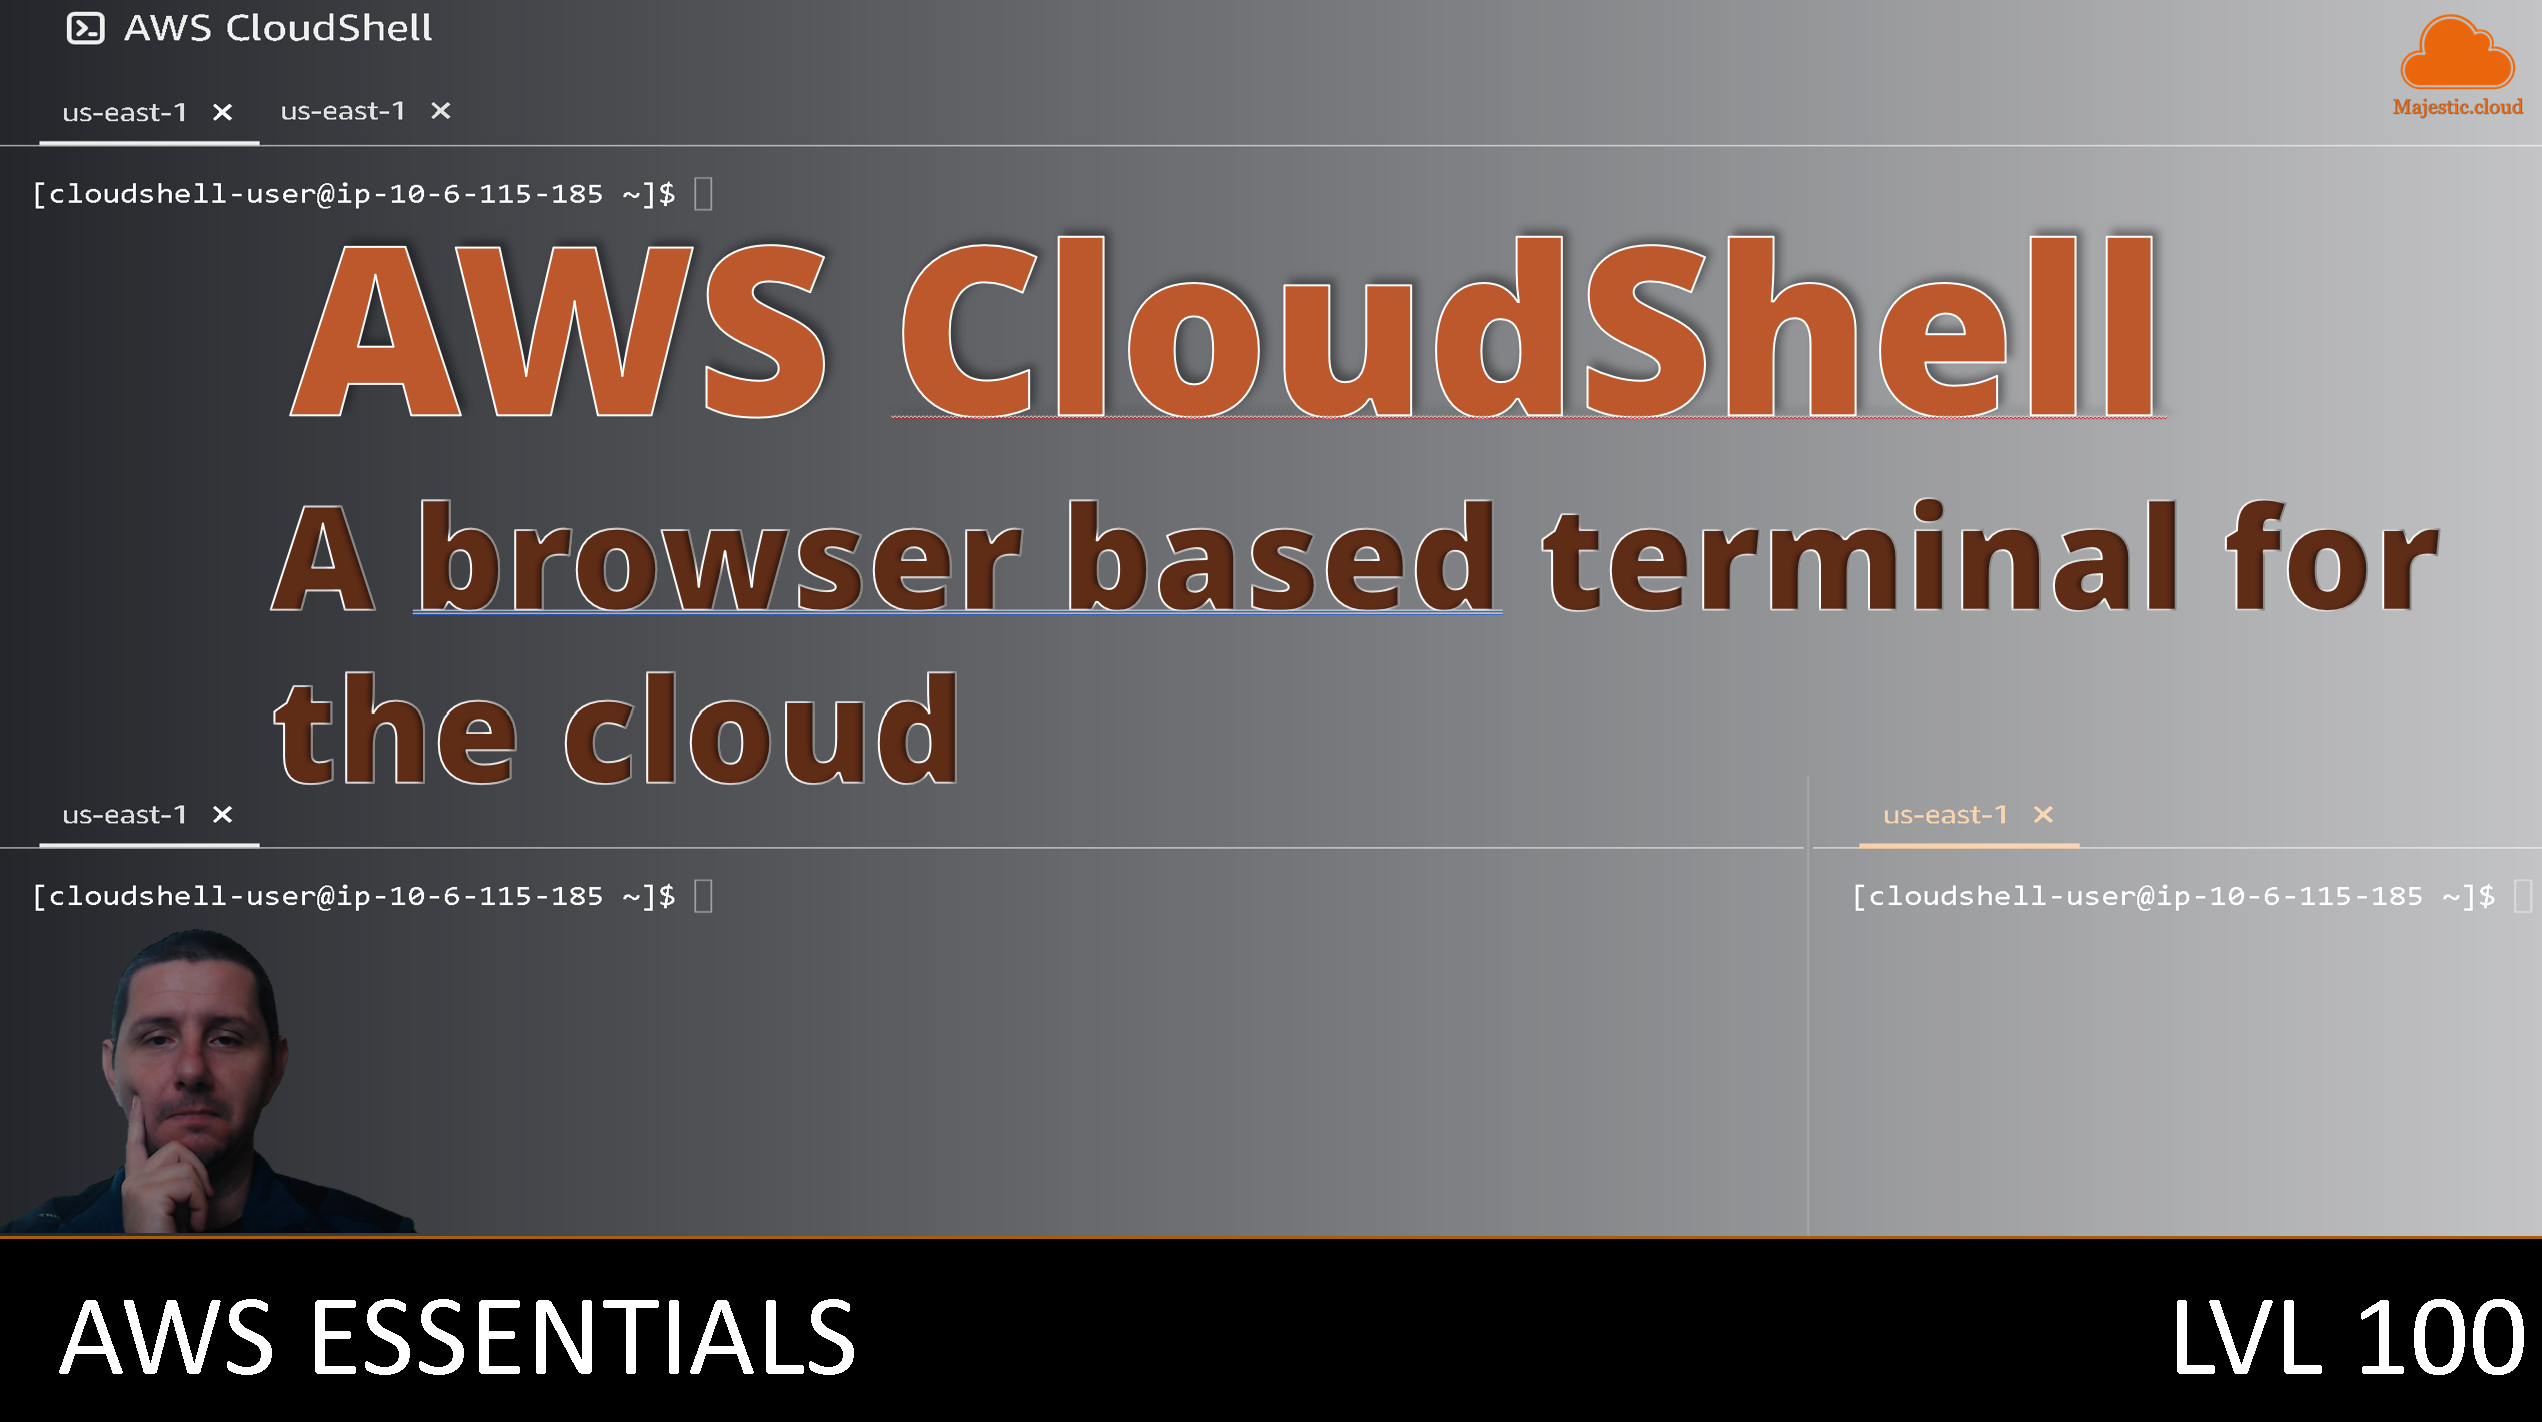 AWS CloudShell: The browser-based terminal for your AWS account